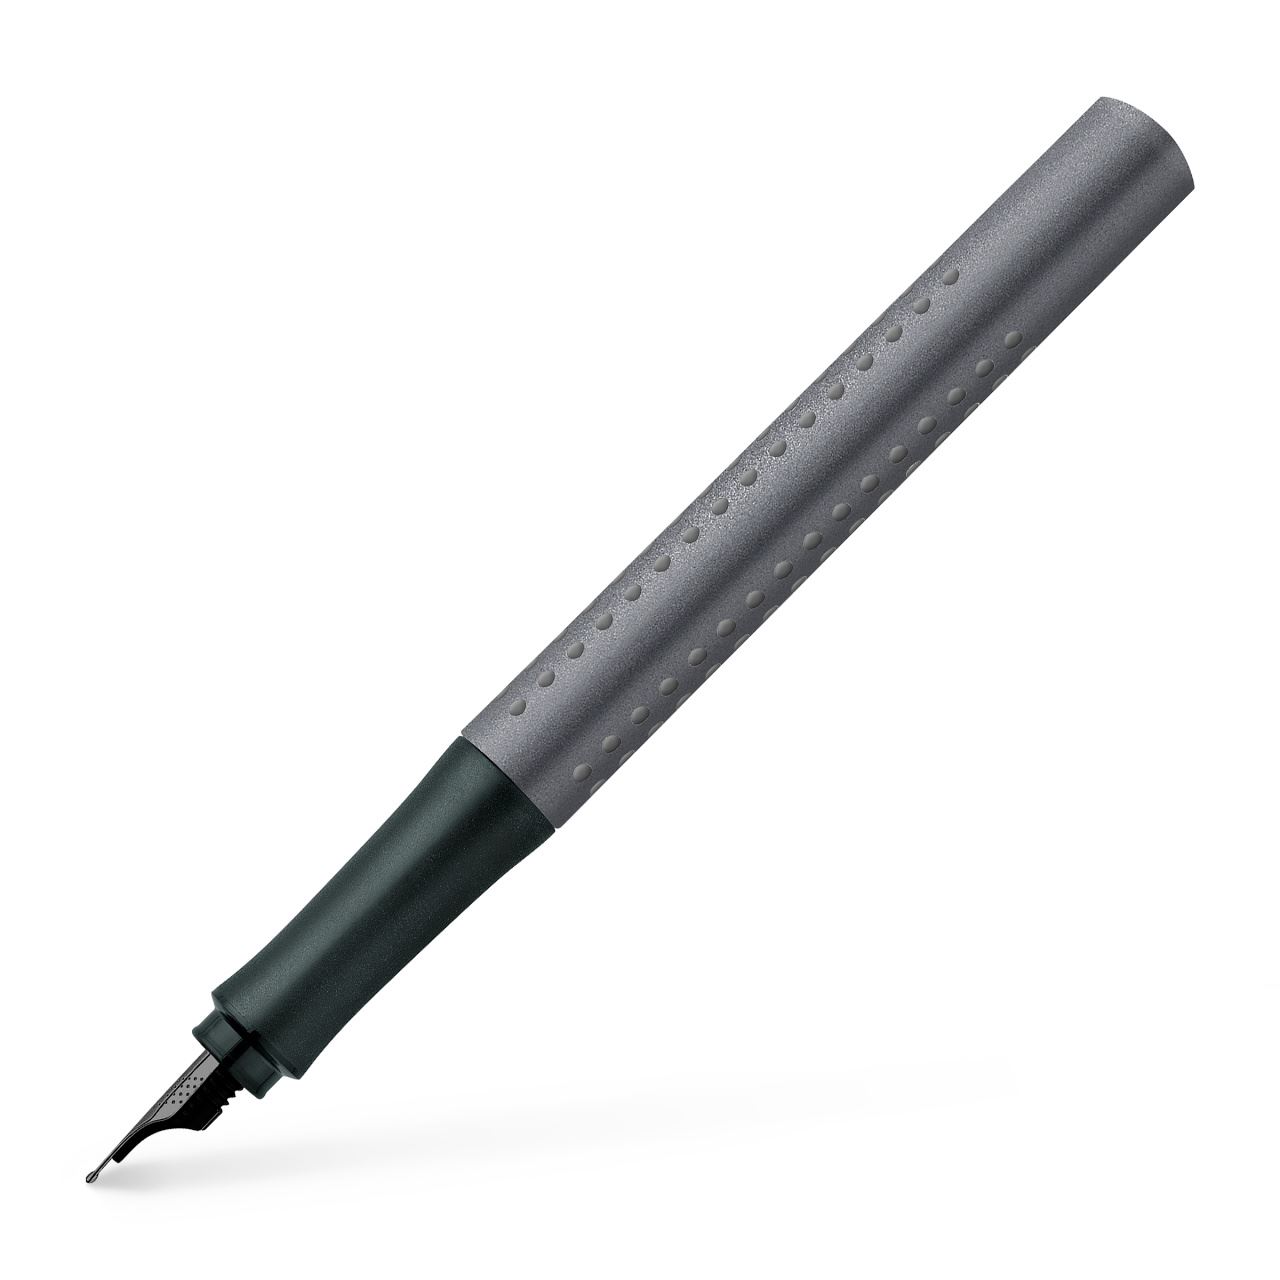 Faber-Castell - Stylo-plume Grip anthracite F